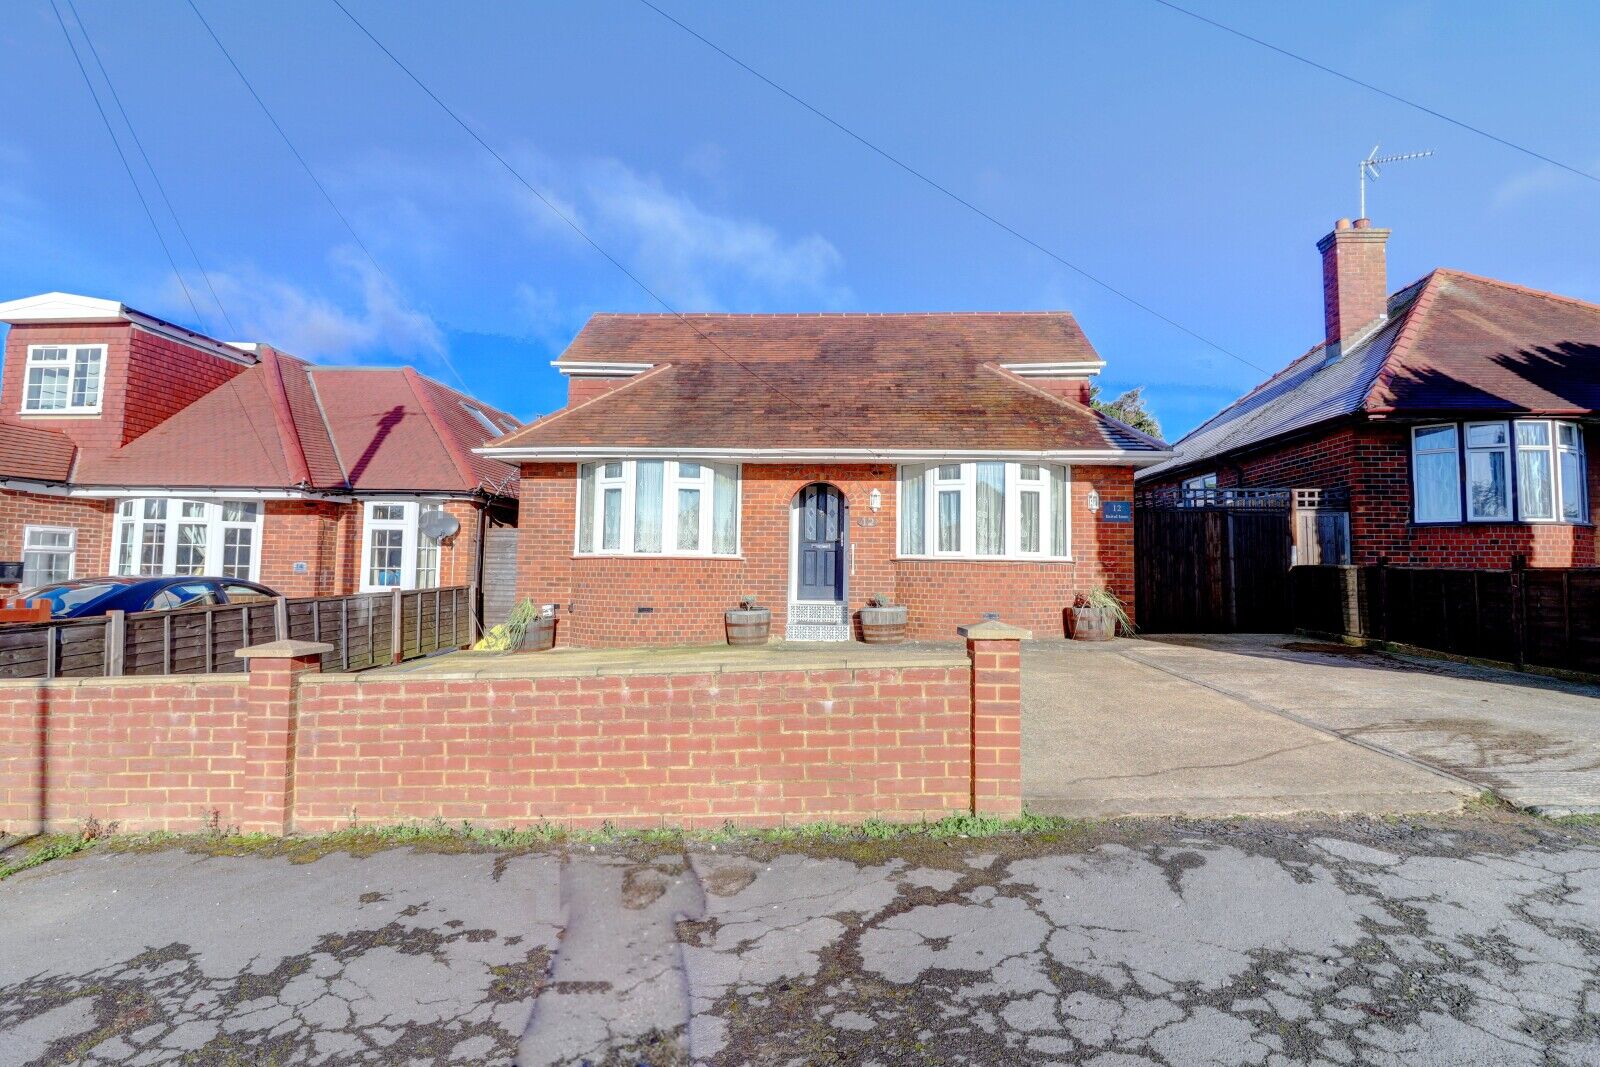 4 bedroom detached house for sale North Drive, High Wycombe, HP13, main image